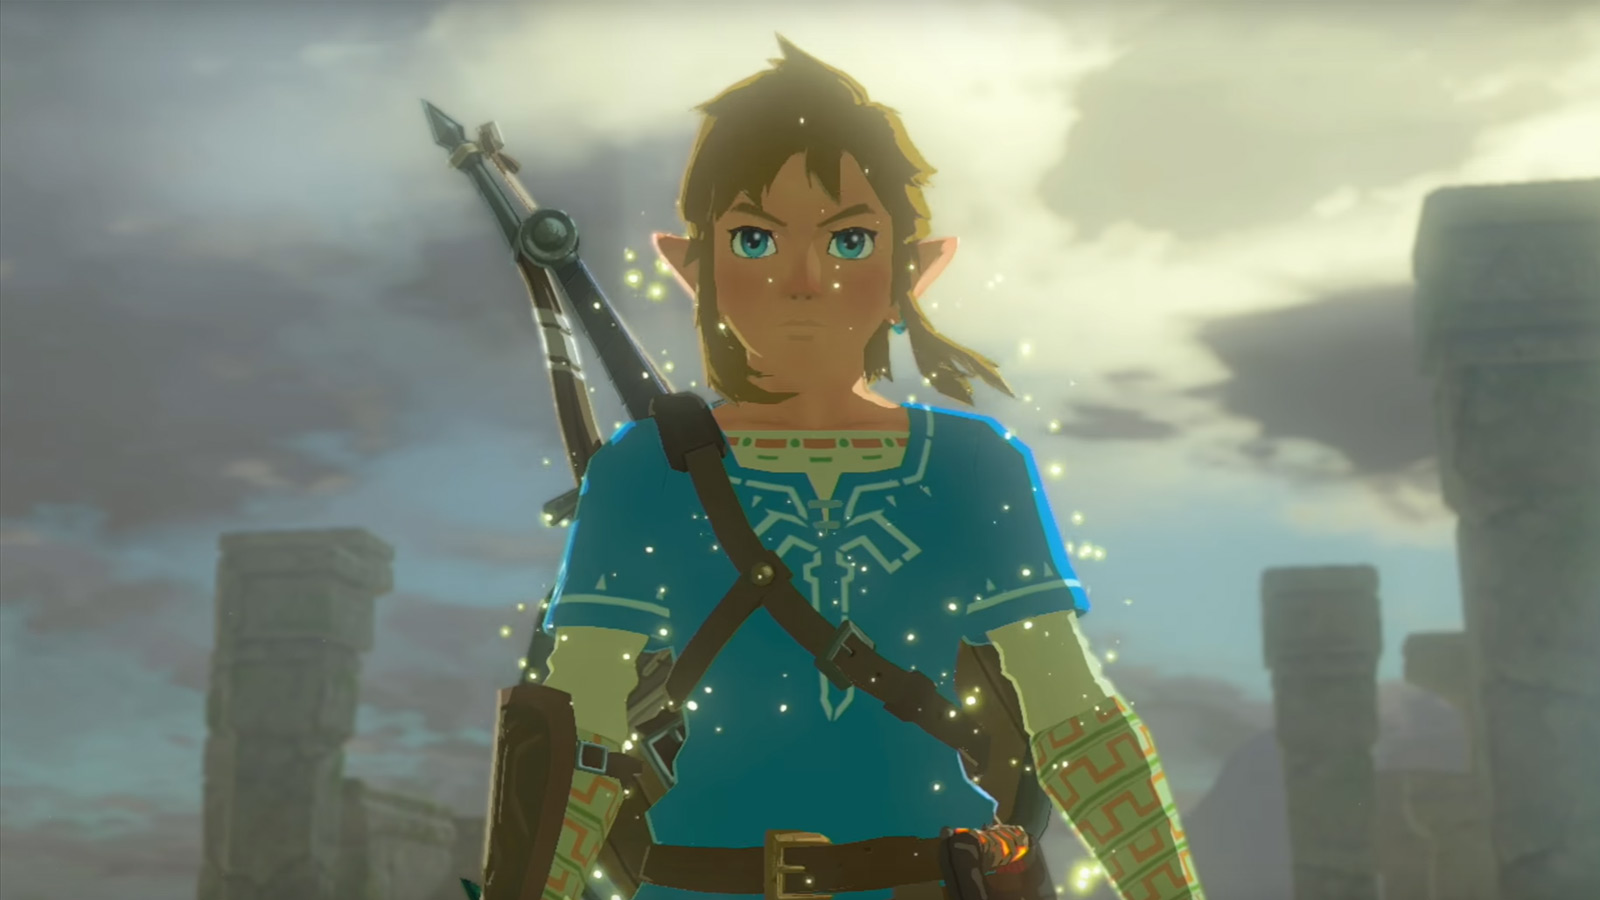 Zelda: Breath of the Wild's official guide released for free - Polygon